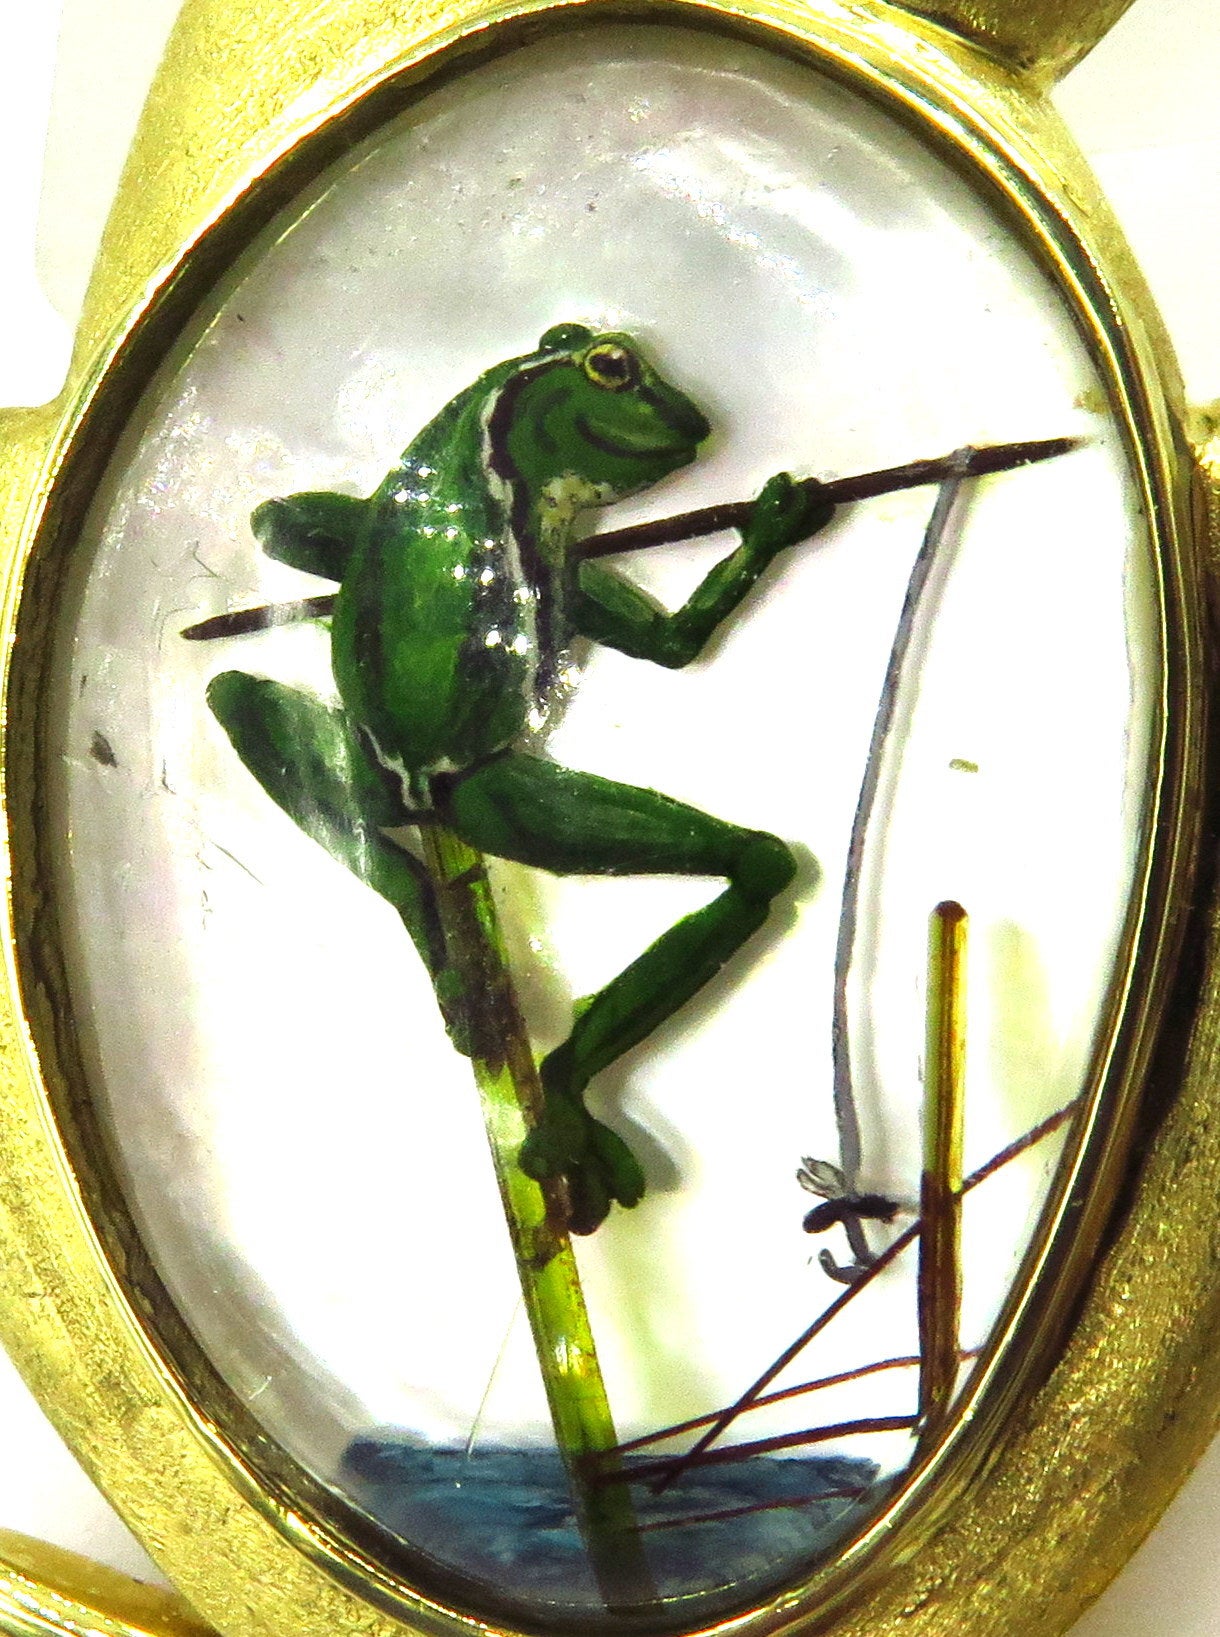 So much character!!! This is a very happy frog with emerald eye, fishing inside of another happy frog enjoying his day!
This large very well articulated double clip type of pin with is 2 5/8